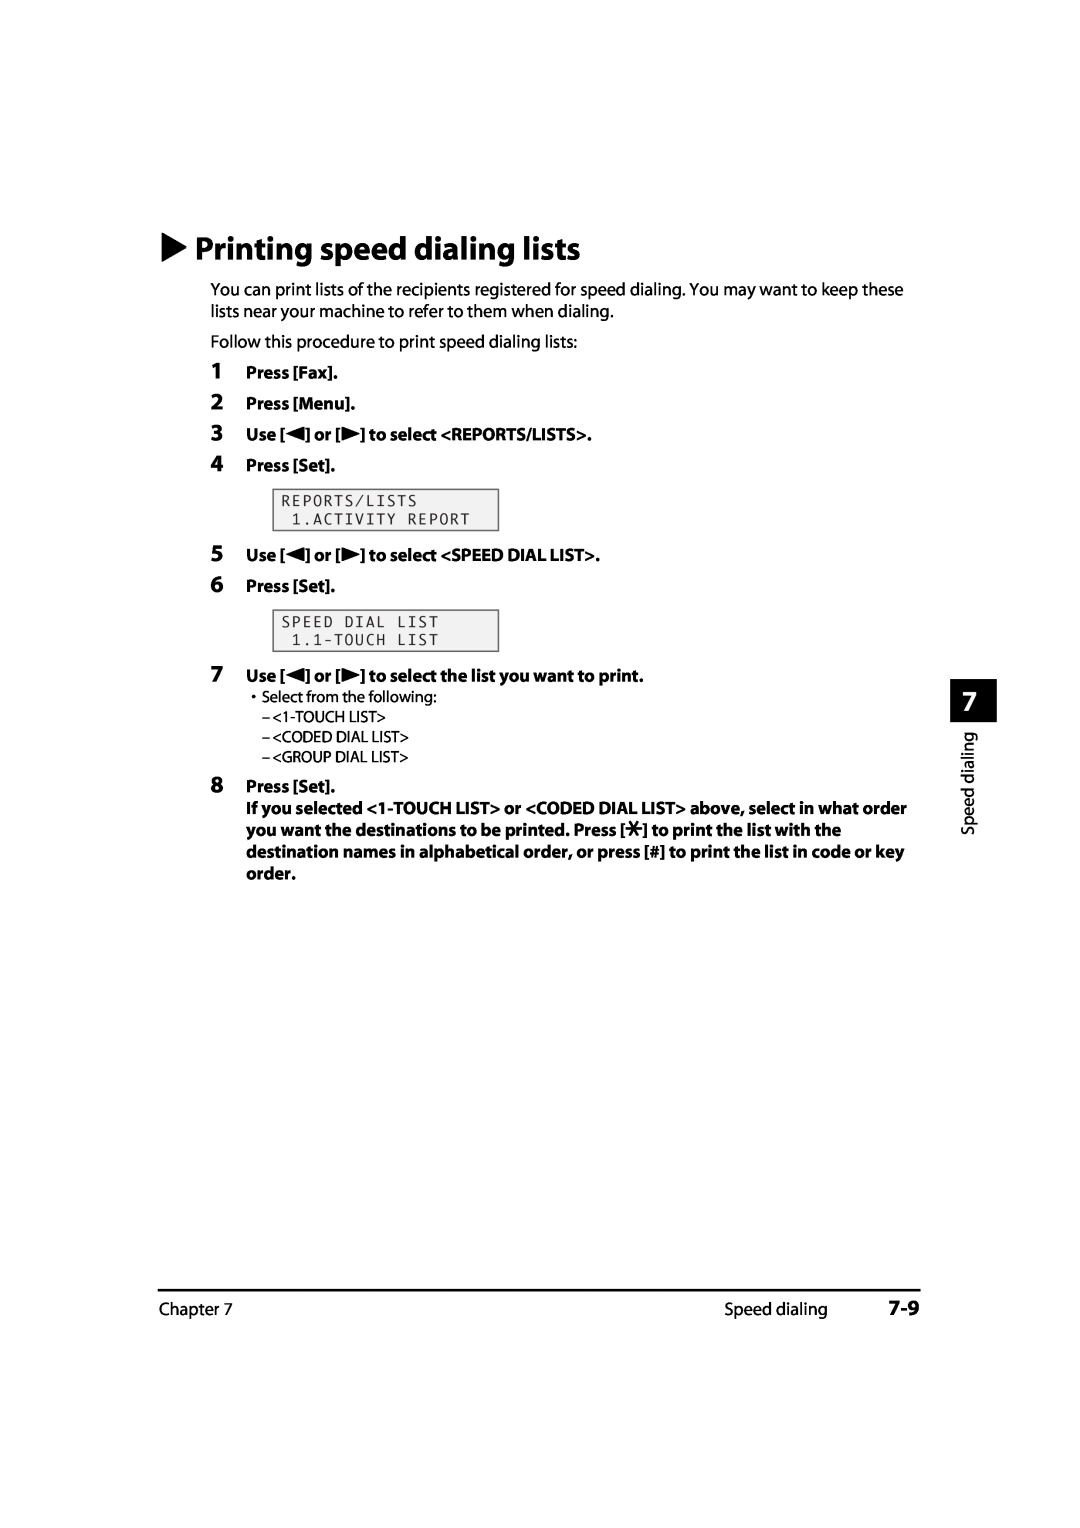 Canon MultiPASS MP730 Printing speed dialing lists, Press Fax 2 Press Menu 3 Use 2 or 3 to select REPORTS/LISTS, Press Set 